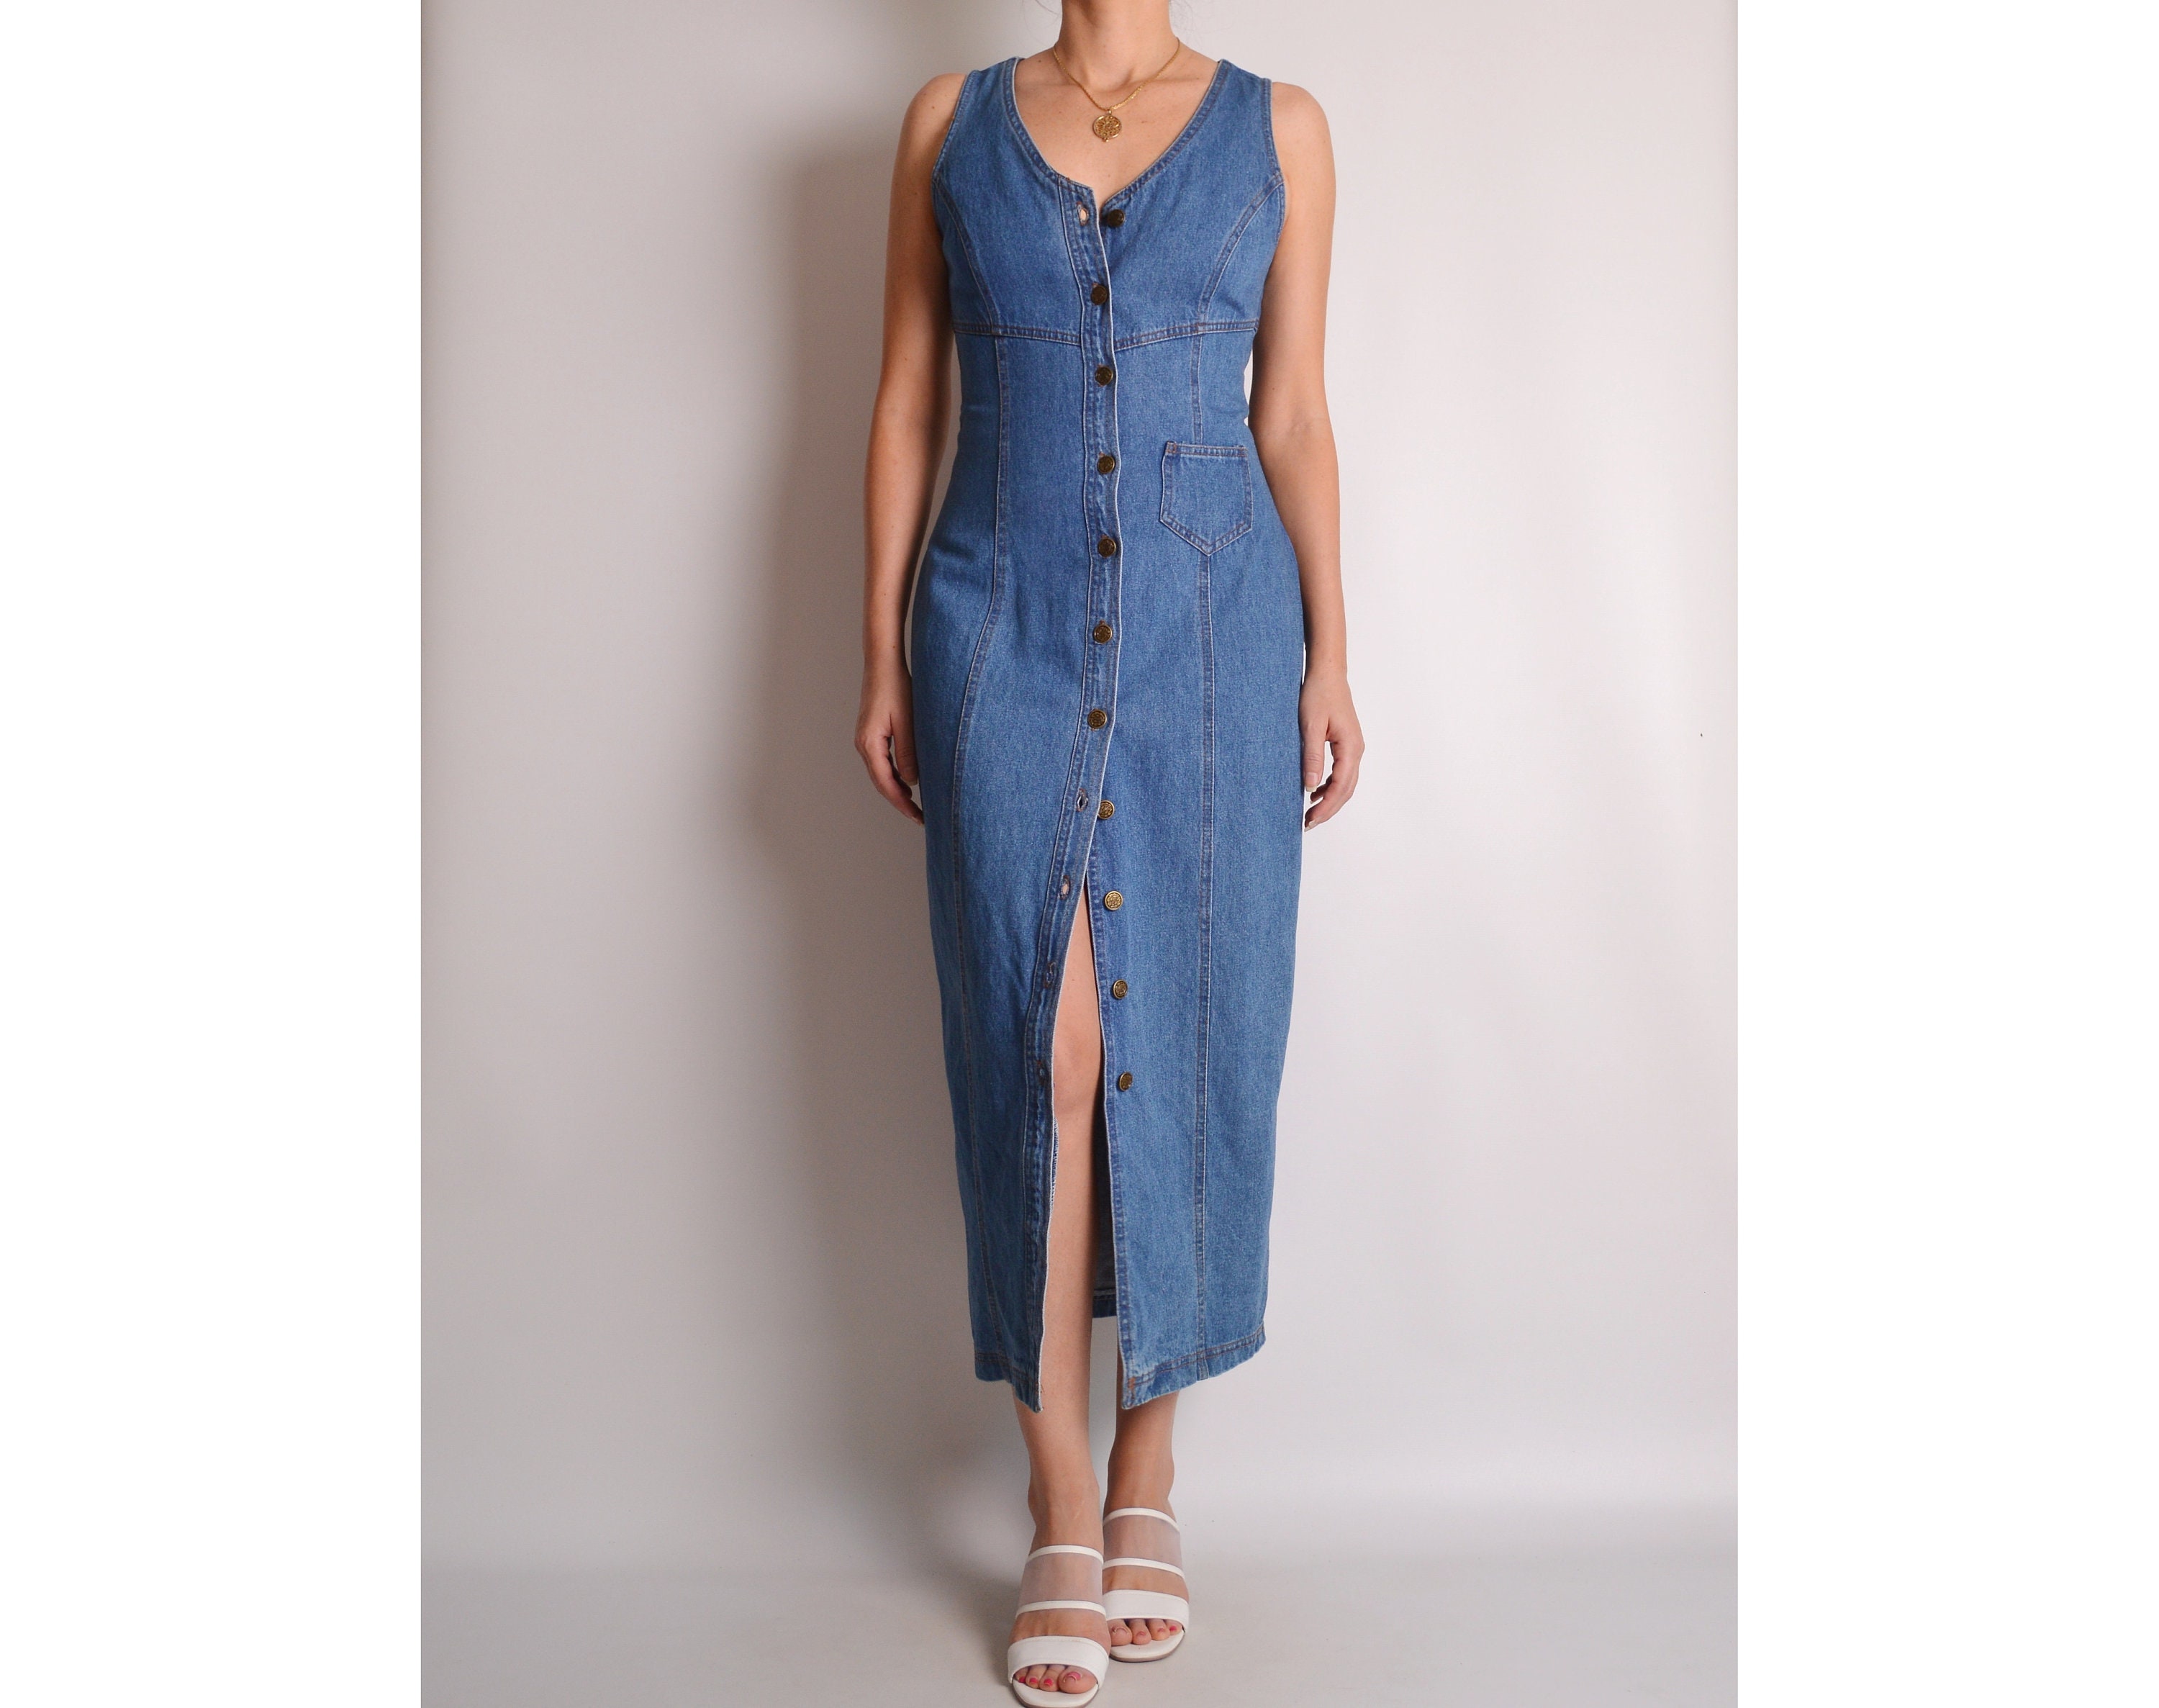 denim dress with buttons down front